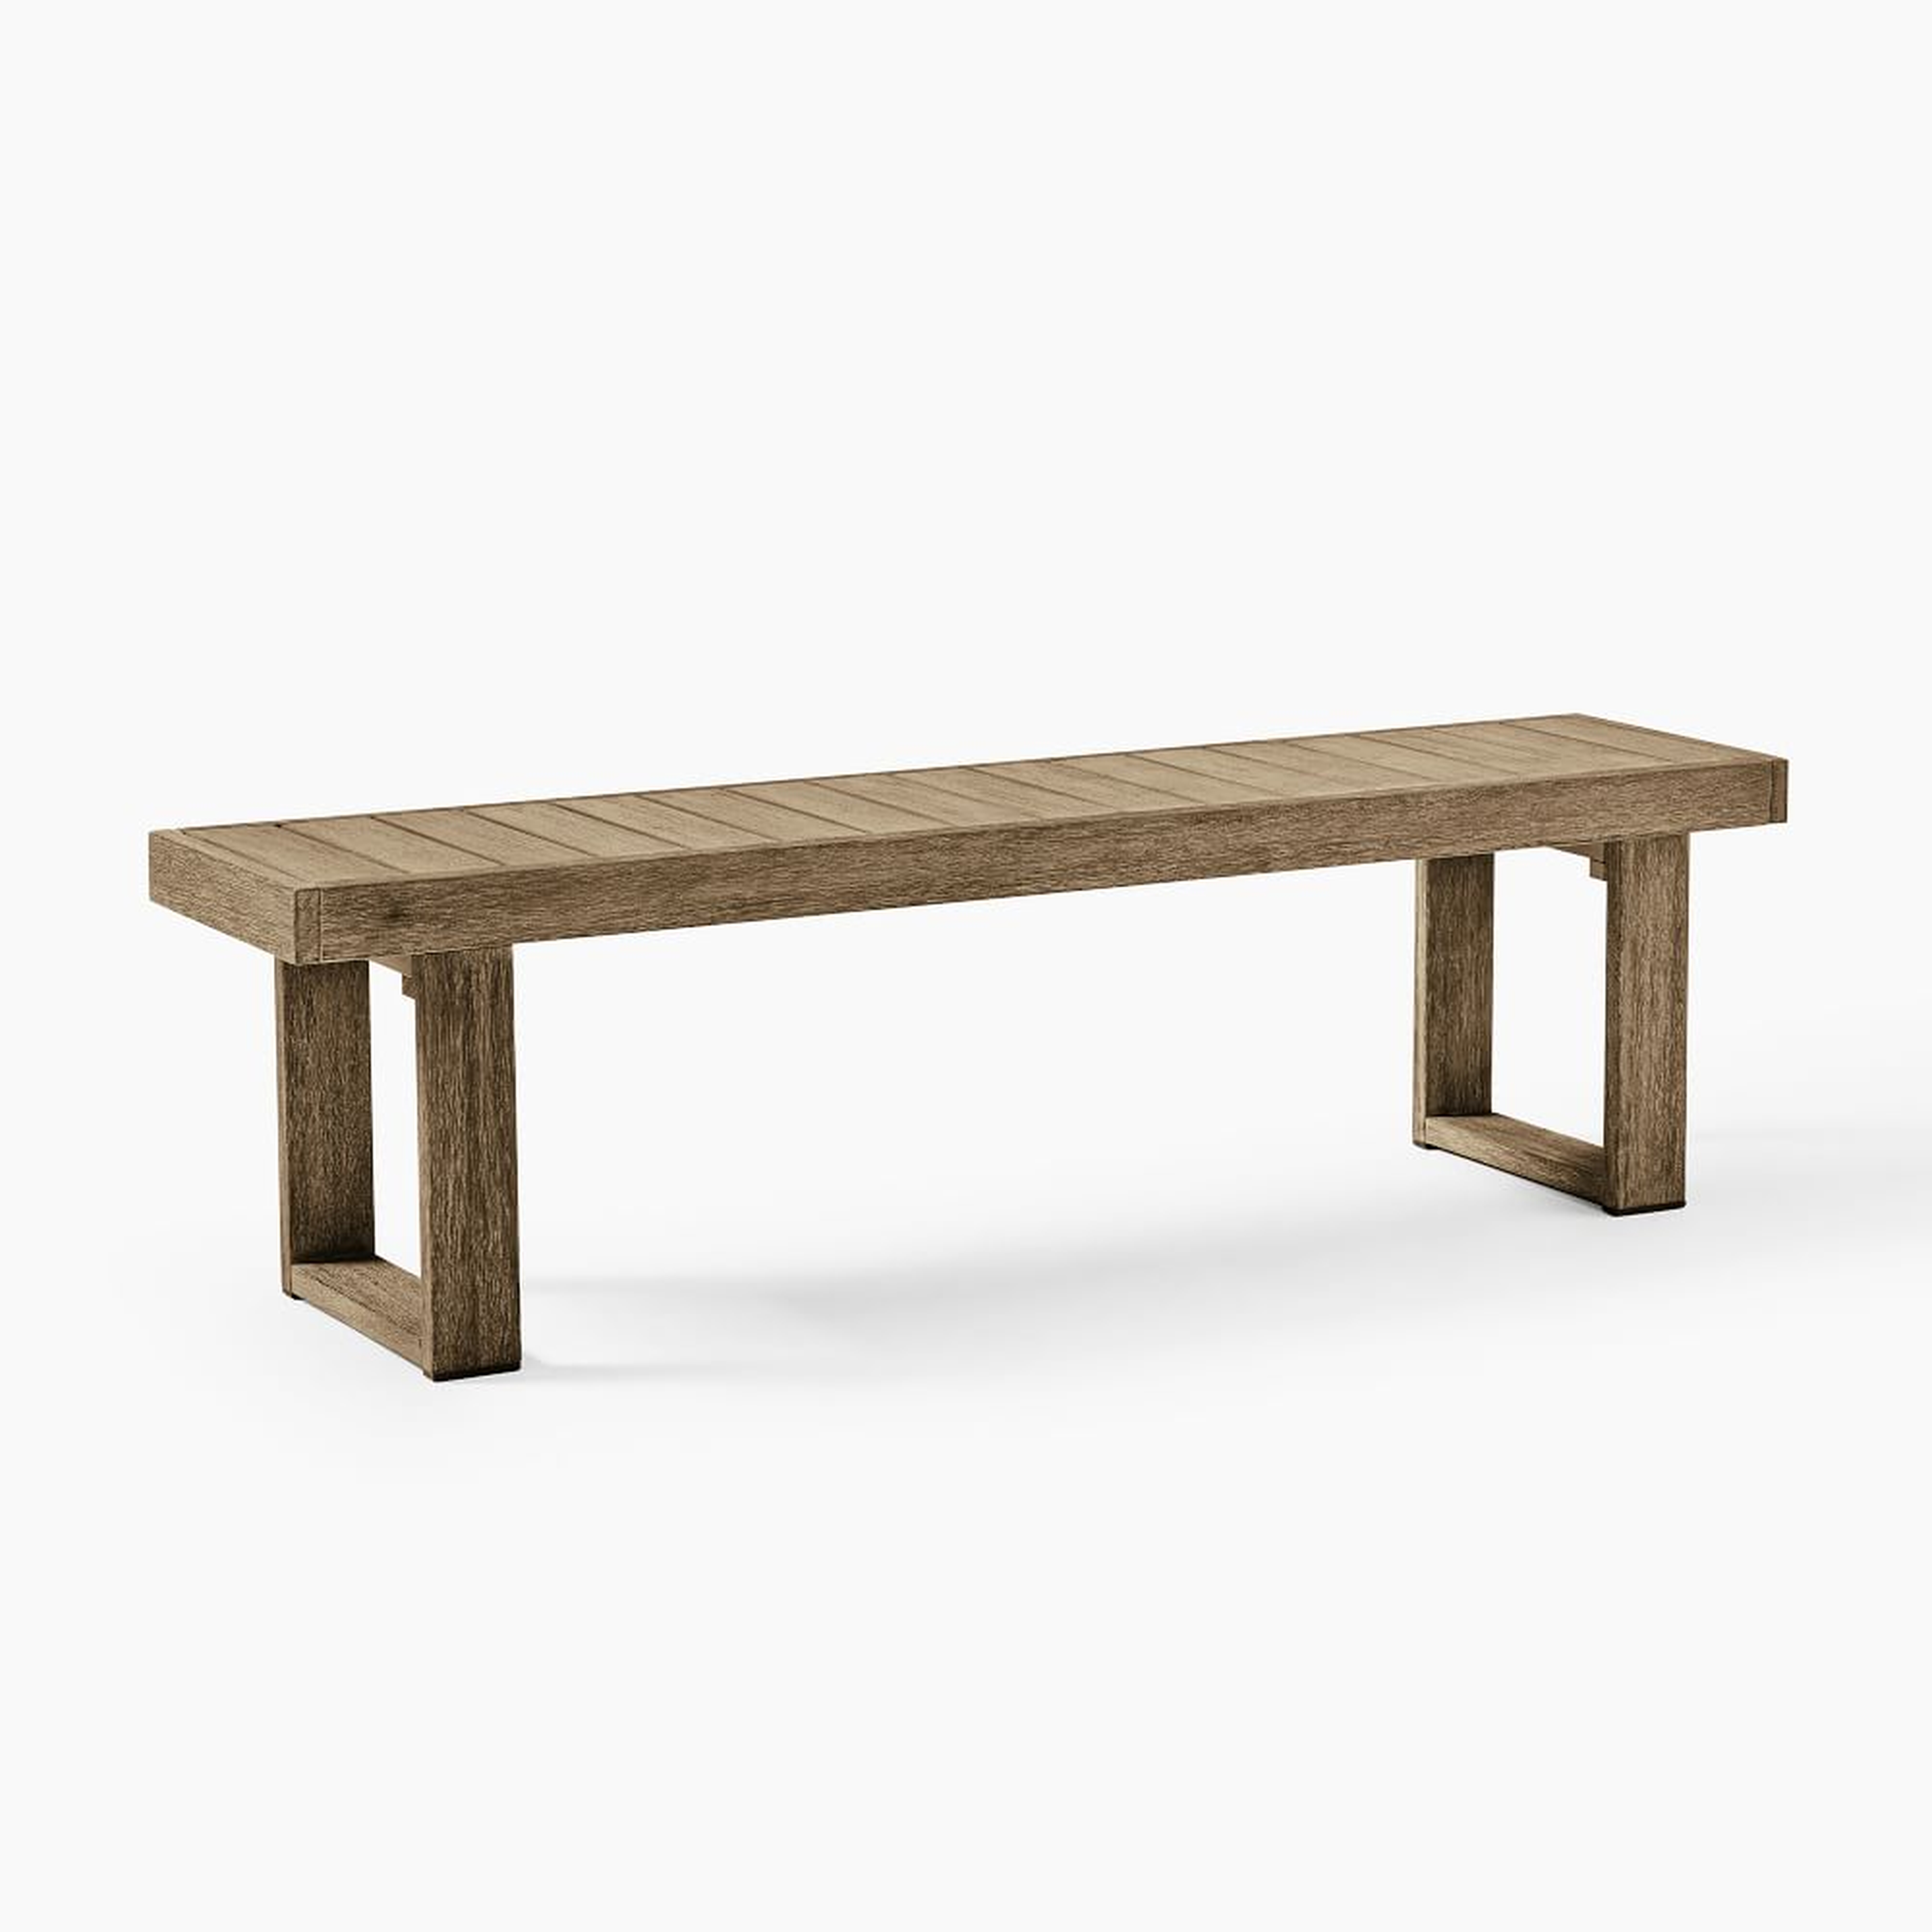 Portside Outdoor Dining Bench, 66", Driftwood - West Elm